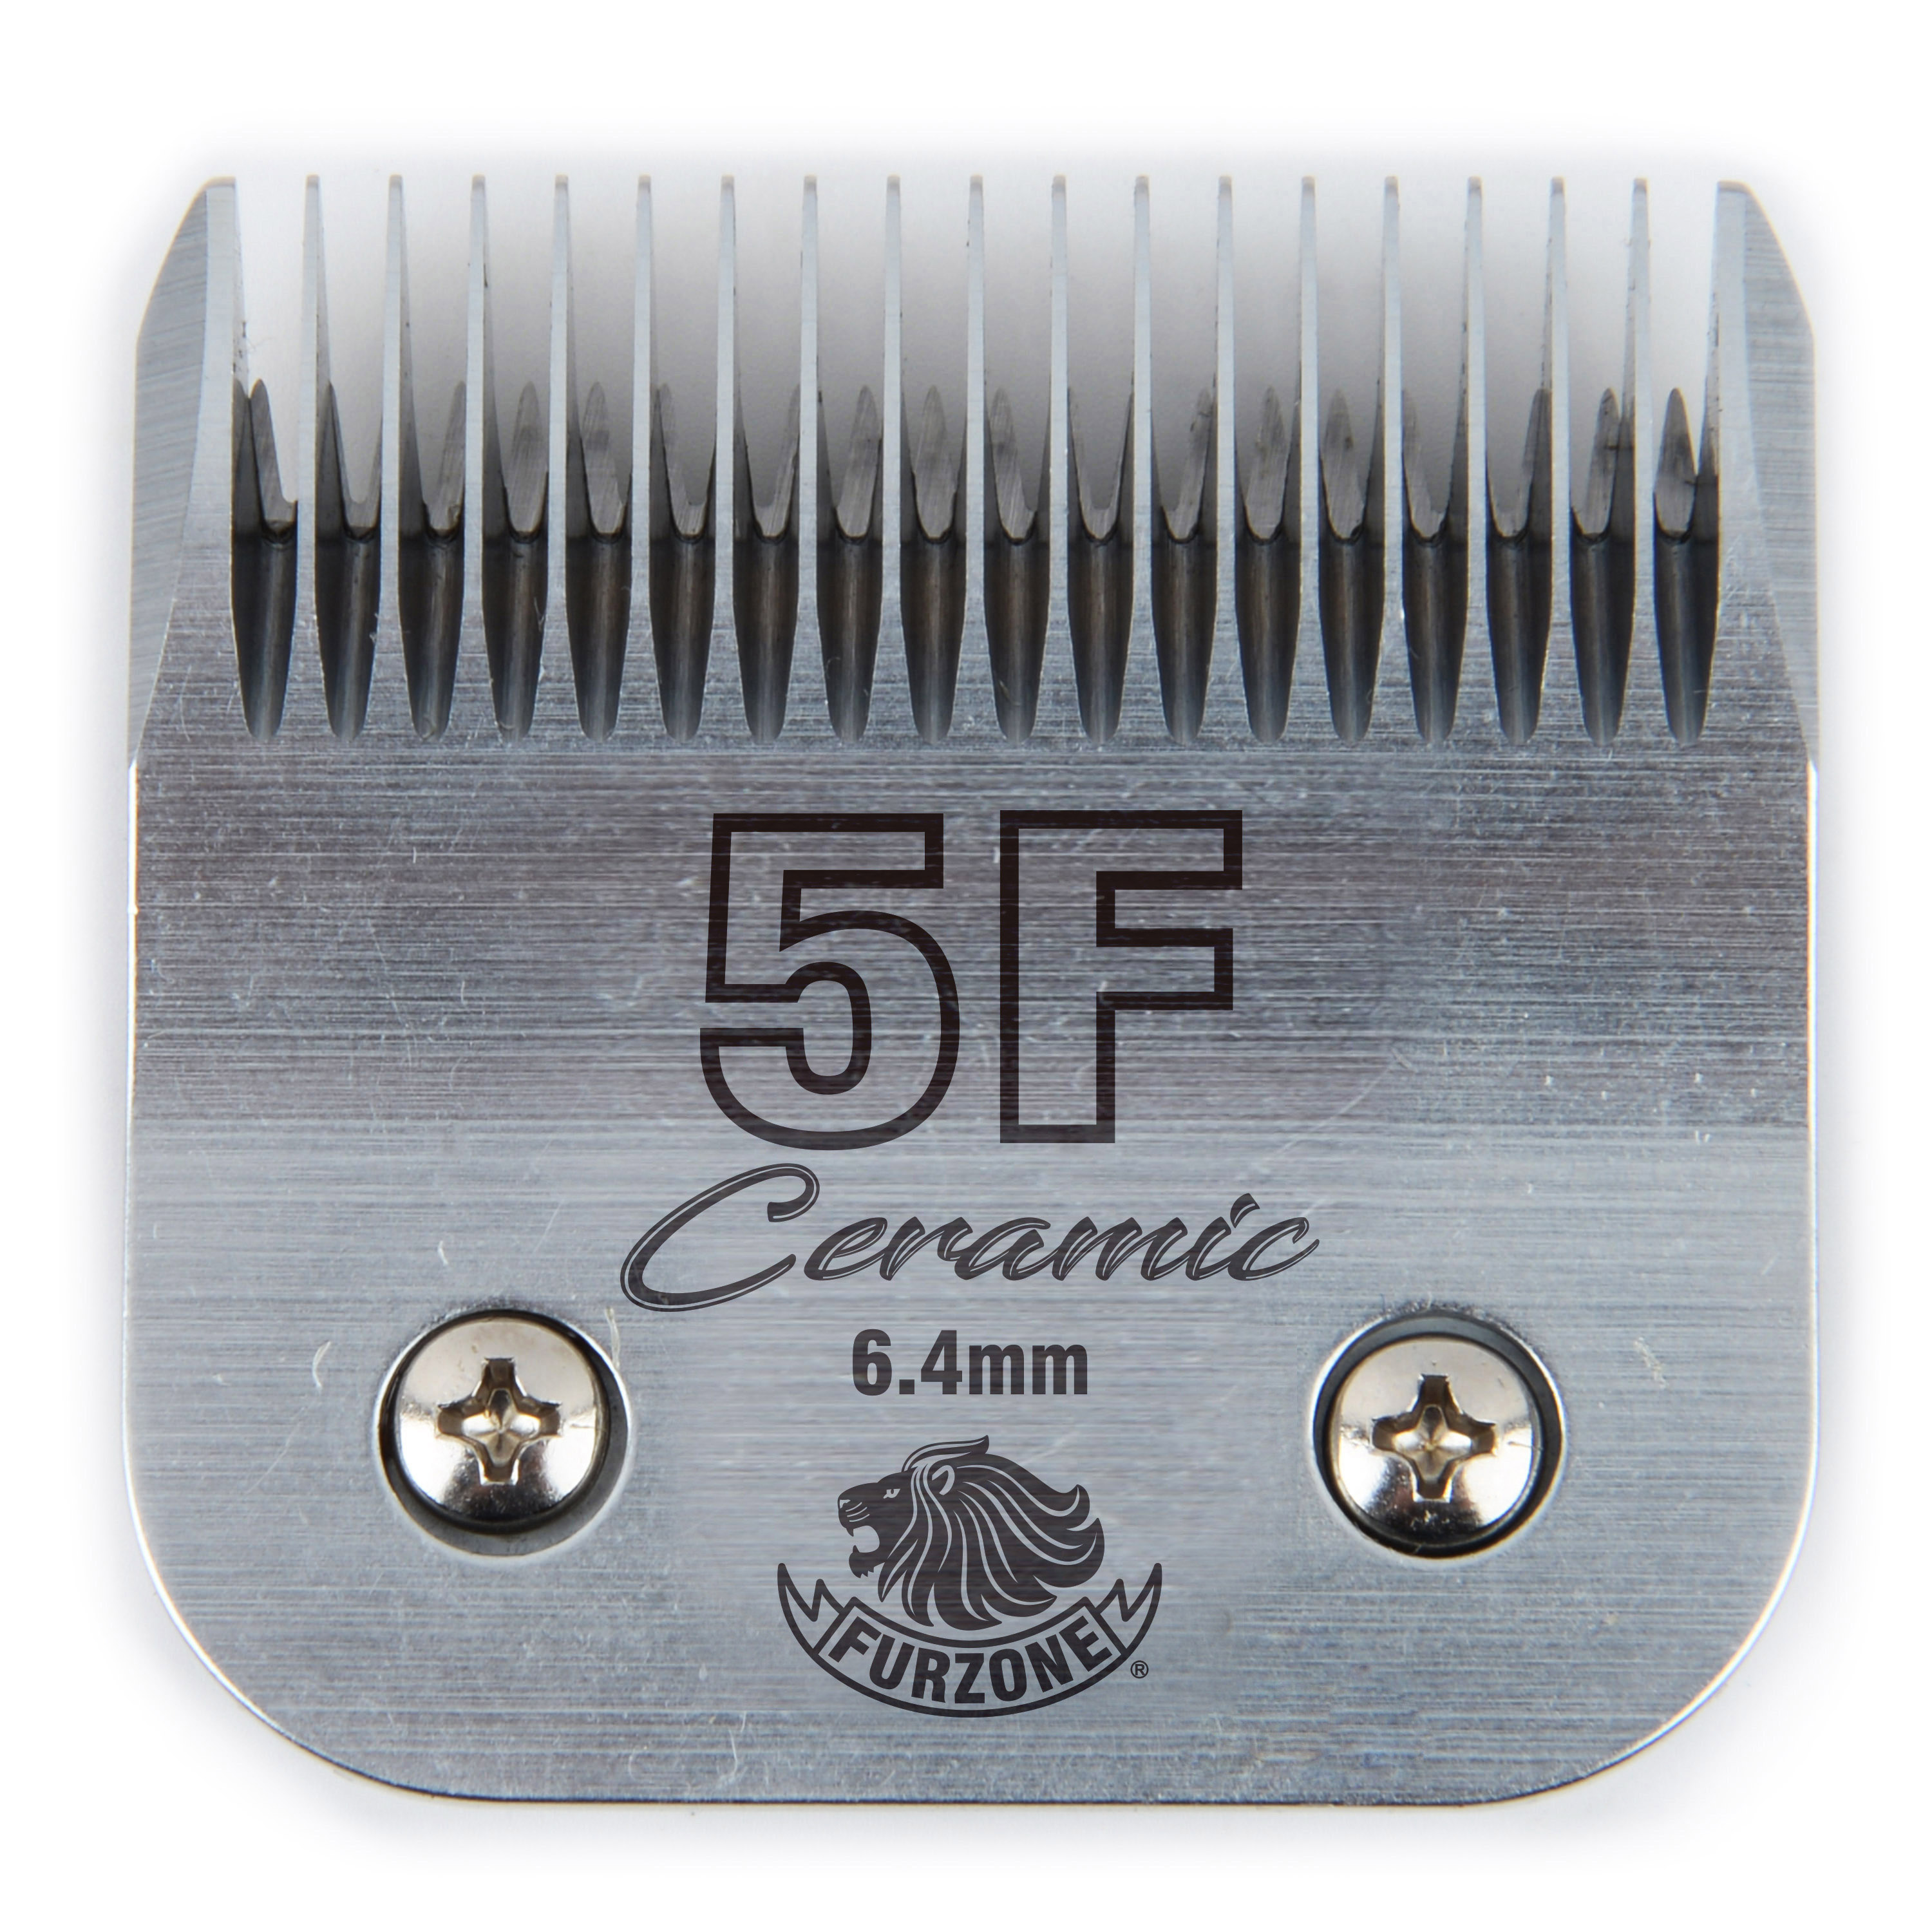 Furzone #5F-6.4mm-Full Teeth Professional A5 Detachable Blade - Made Of High-Tech Ceramic Materials